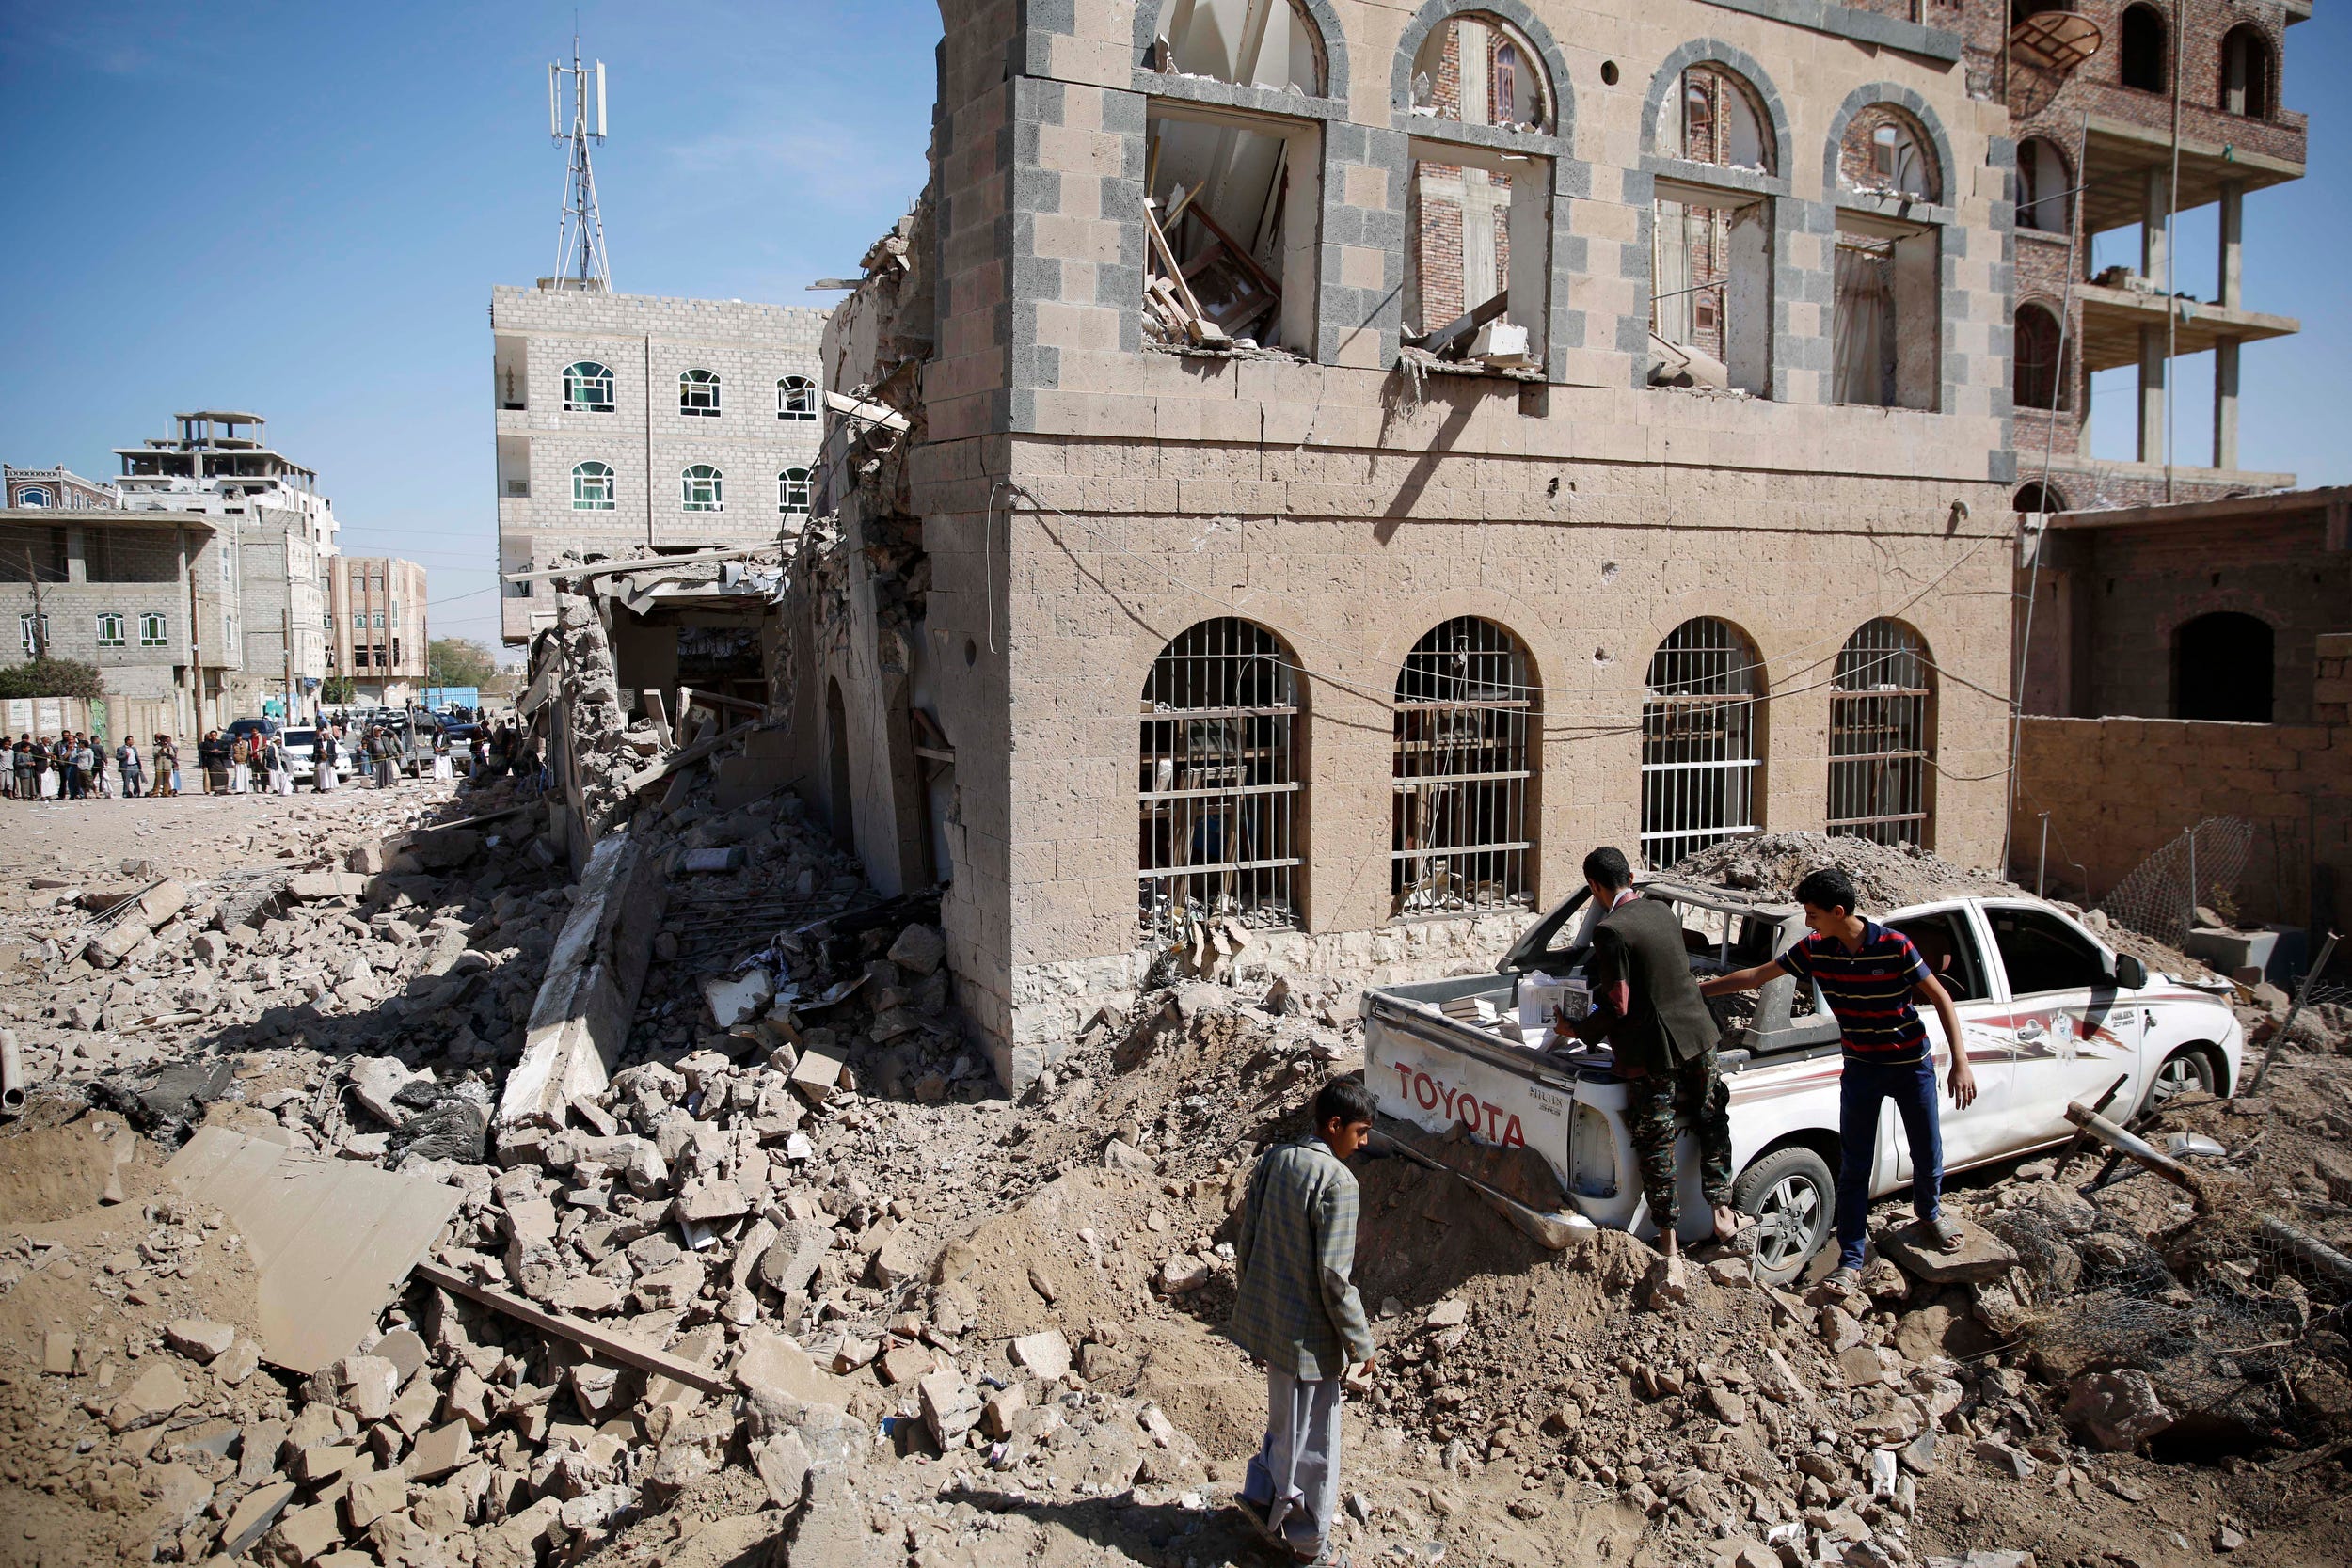 Shiite rebels, known as Houthis, inspect amid a house destroyed by Saudi-led airstrikes in Sanaa, Yemen, Wednesday, Oct. 28, 2015.